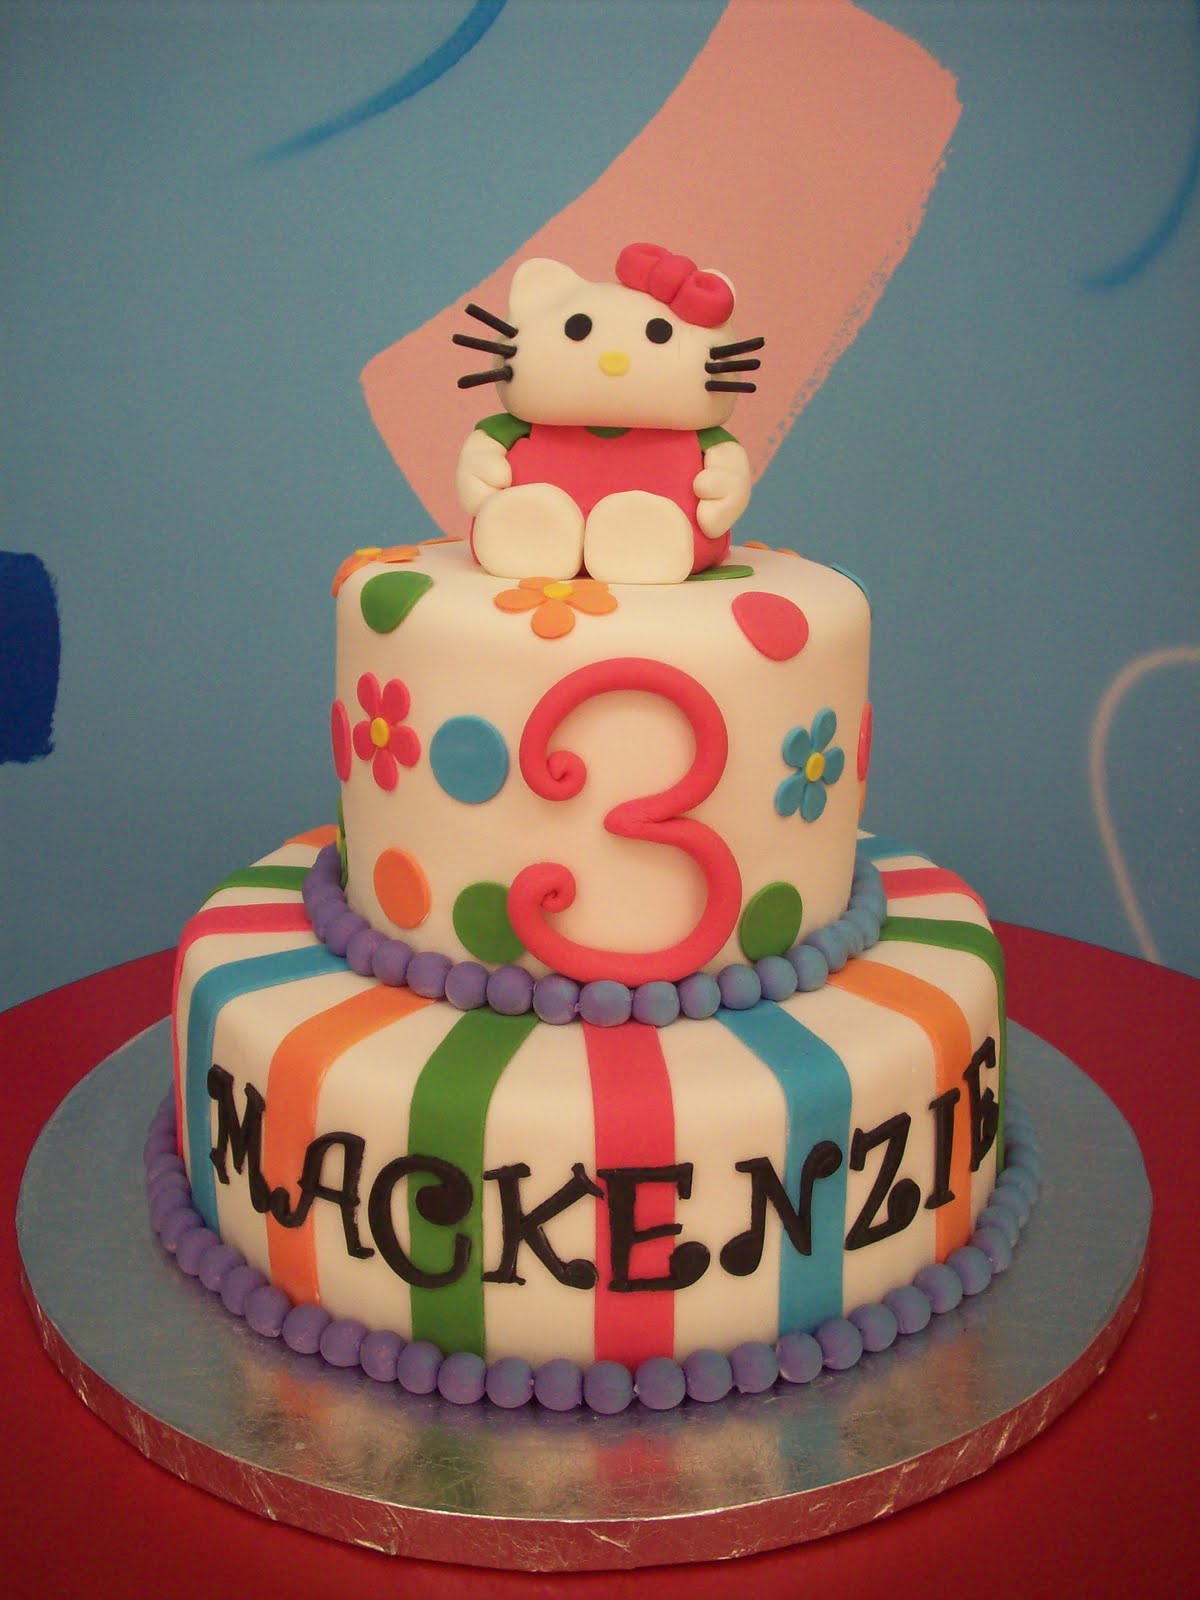 cool easy cake decorating ideas All edible and handmade Hello Kitty - you can actually see where her 